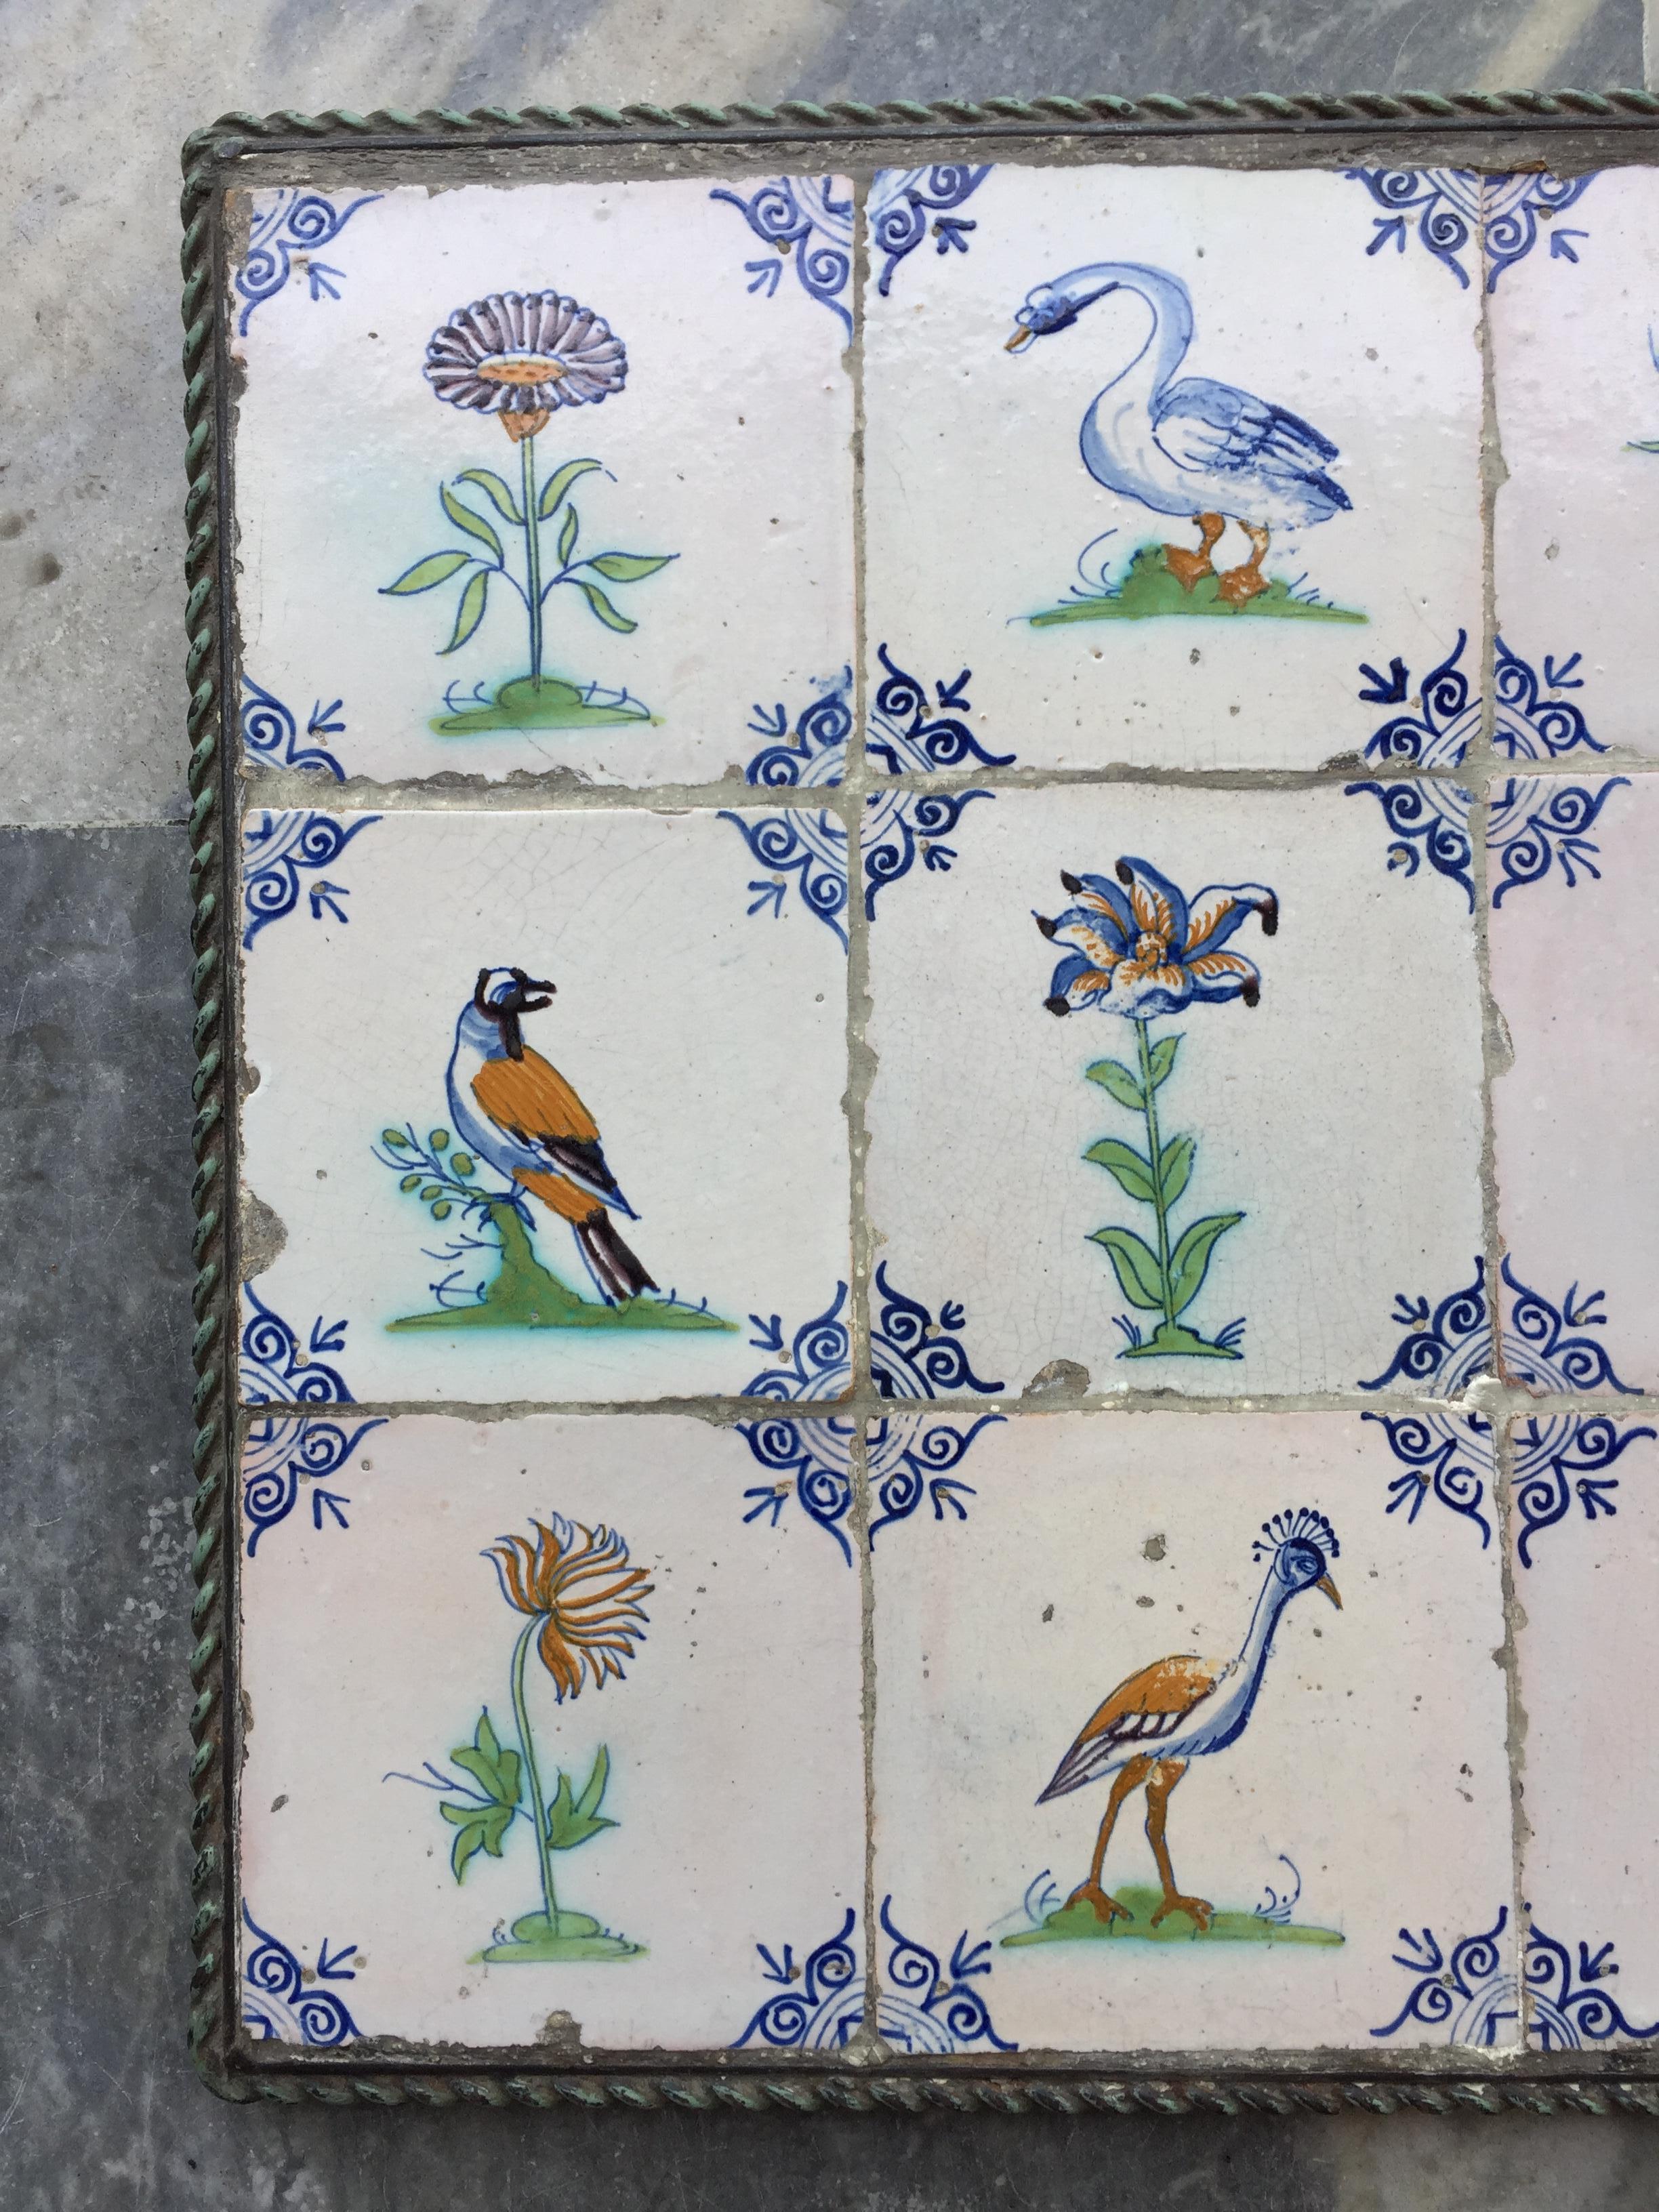 An exceptional set of 15 polychrome Dutch Delft tiles with birds, flowers, and insects. 
Made in The Netherlands, circa 1625 - 1650.

This set of tiles is of very fine quality and has a wonderful bright glaze. The images are painted after engravings